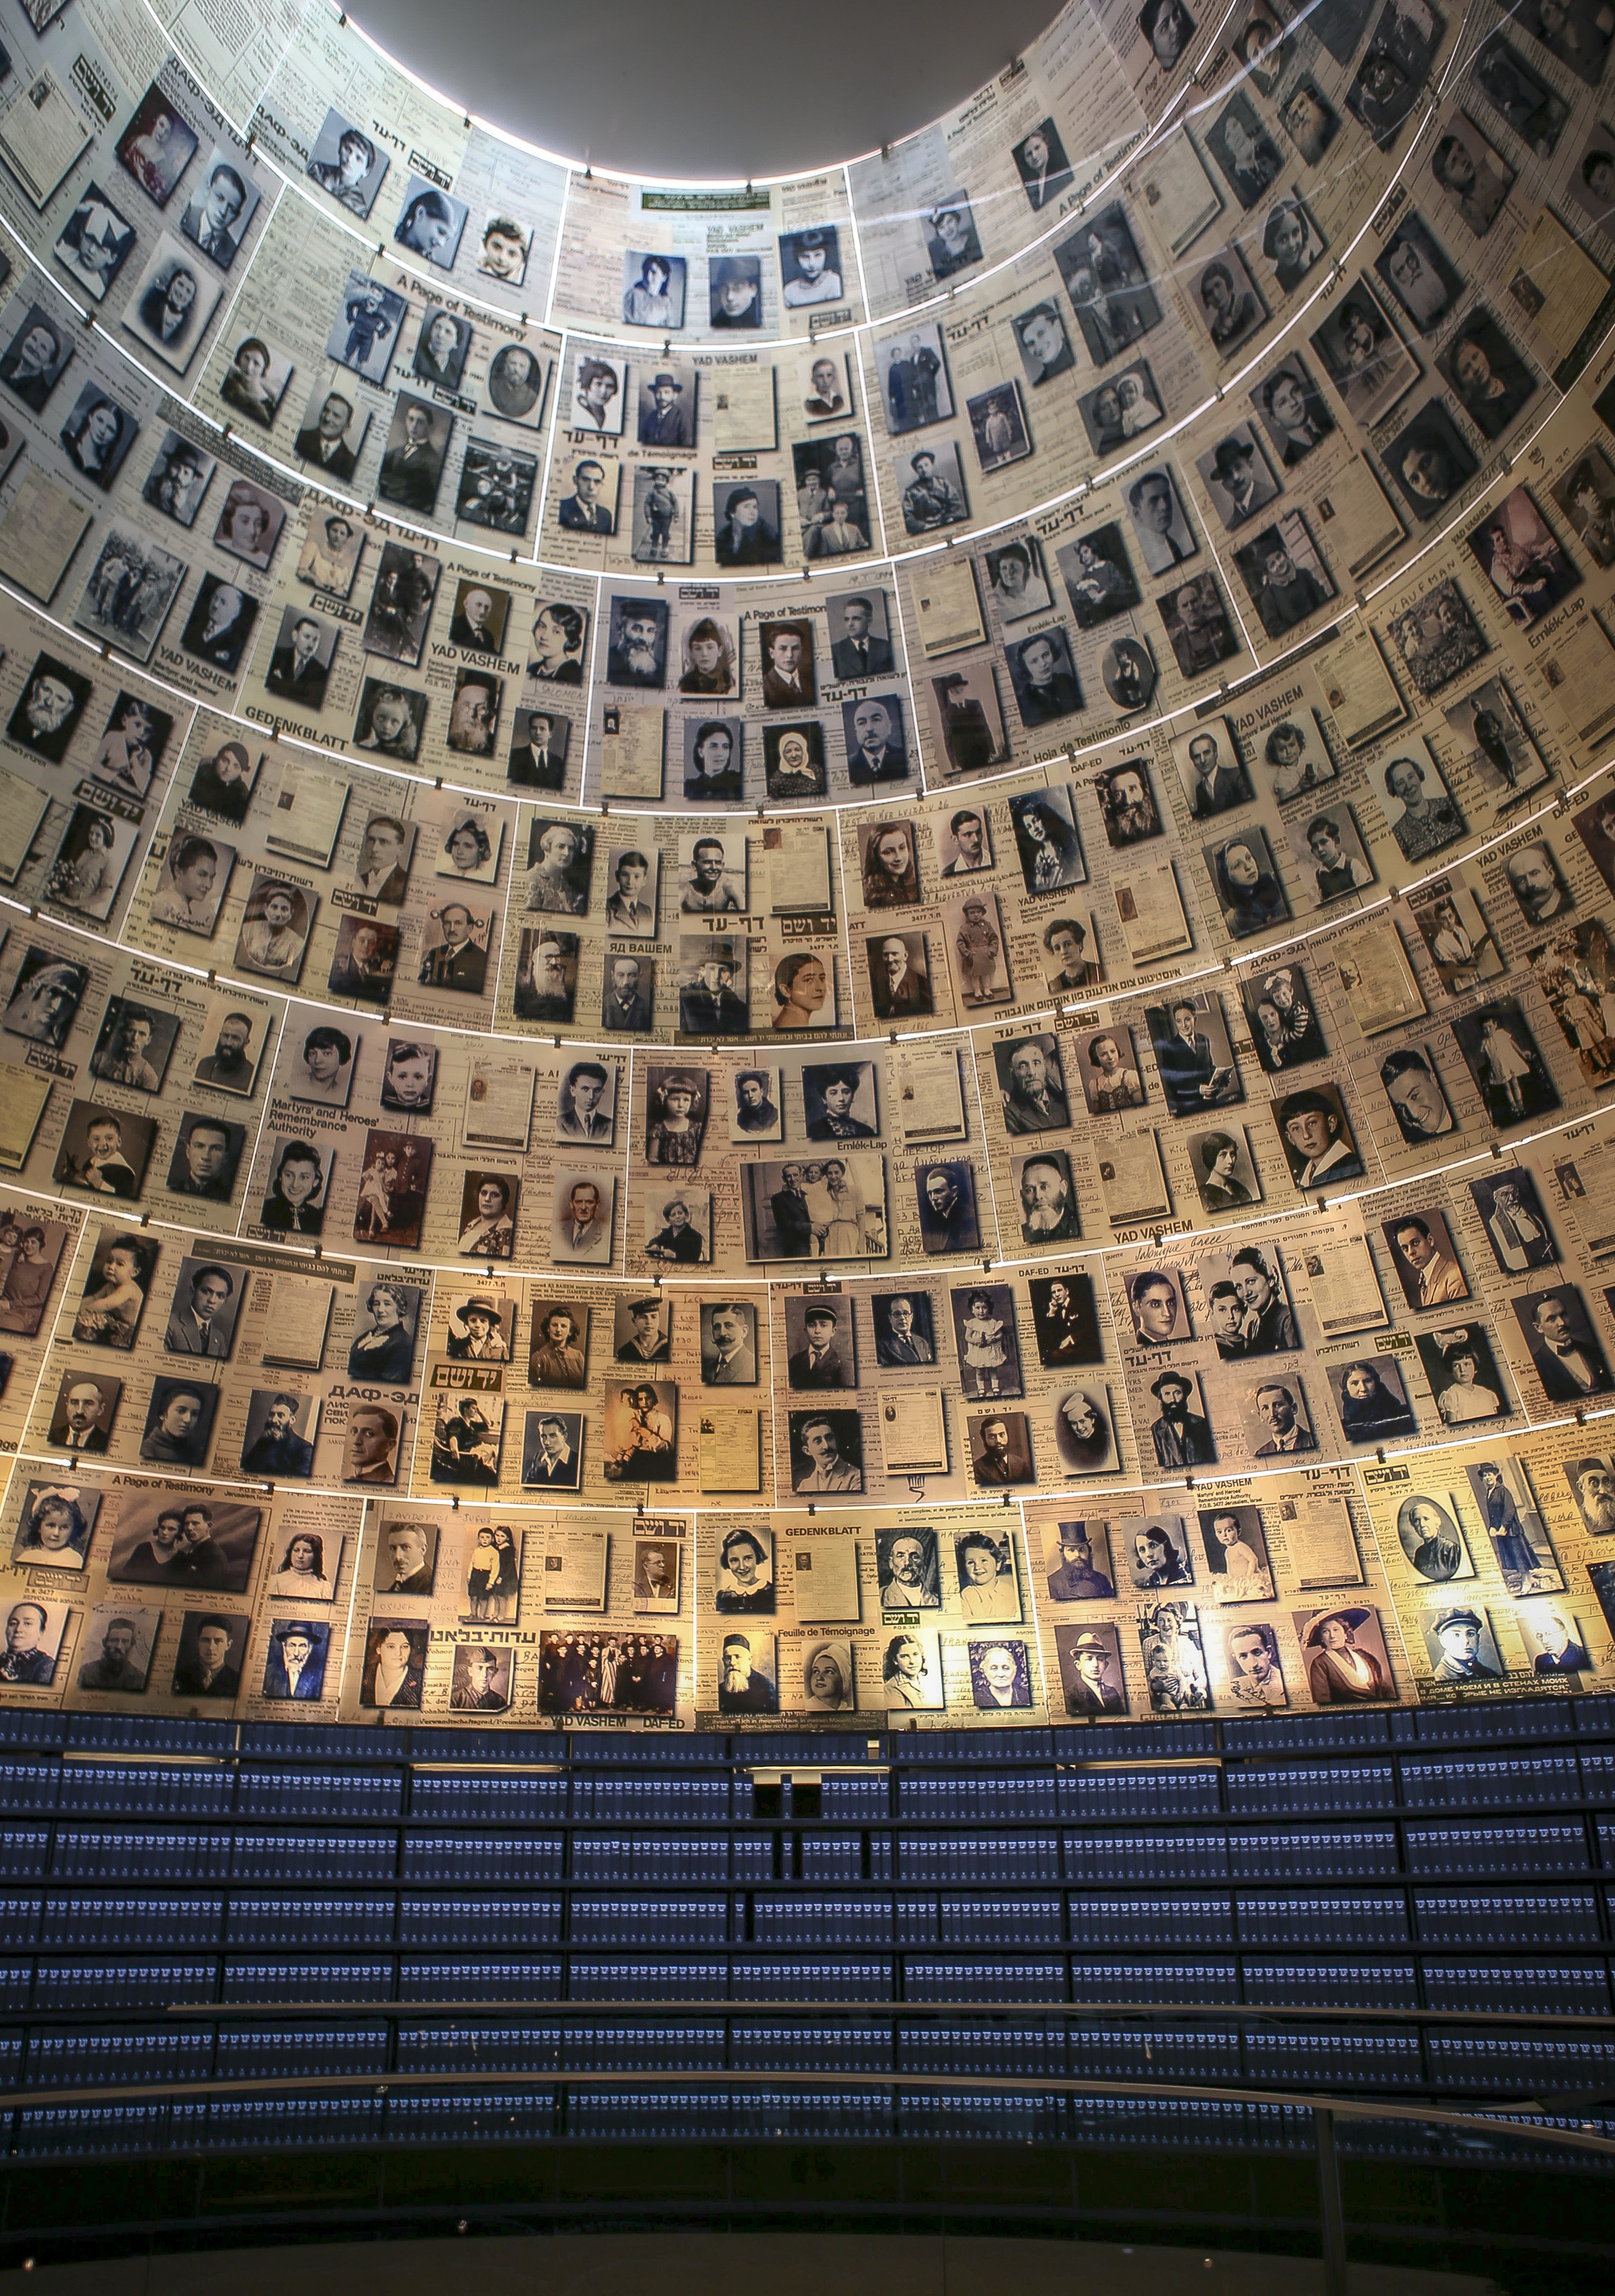 A general view of Yad Vashem's Hall of Remembrance on June 26, 2018 in Jerusalem, Israel. (Photo by Ian Vogler - Pool/Getty Images)